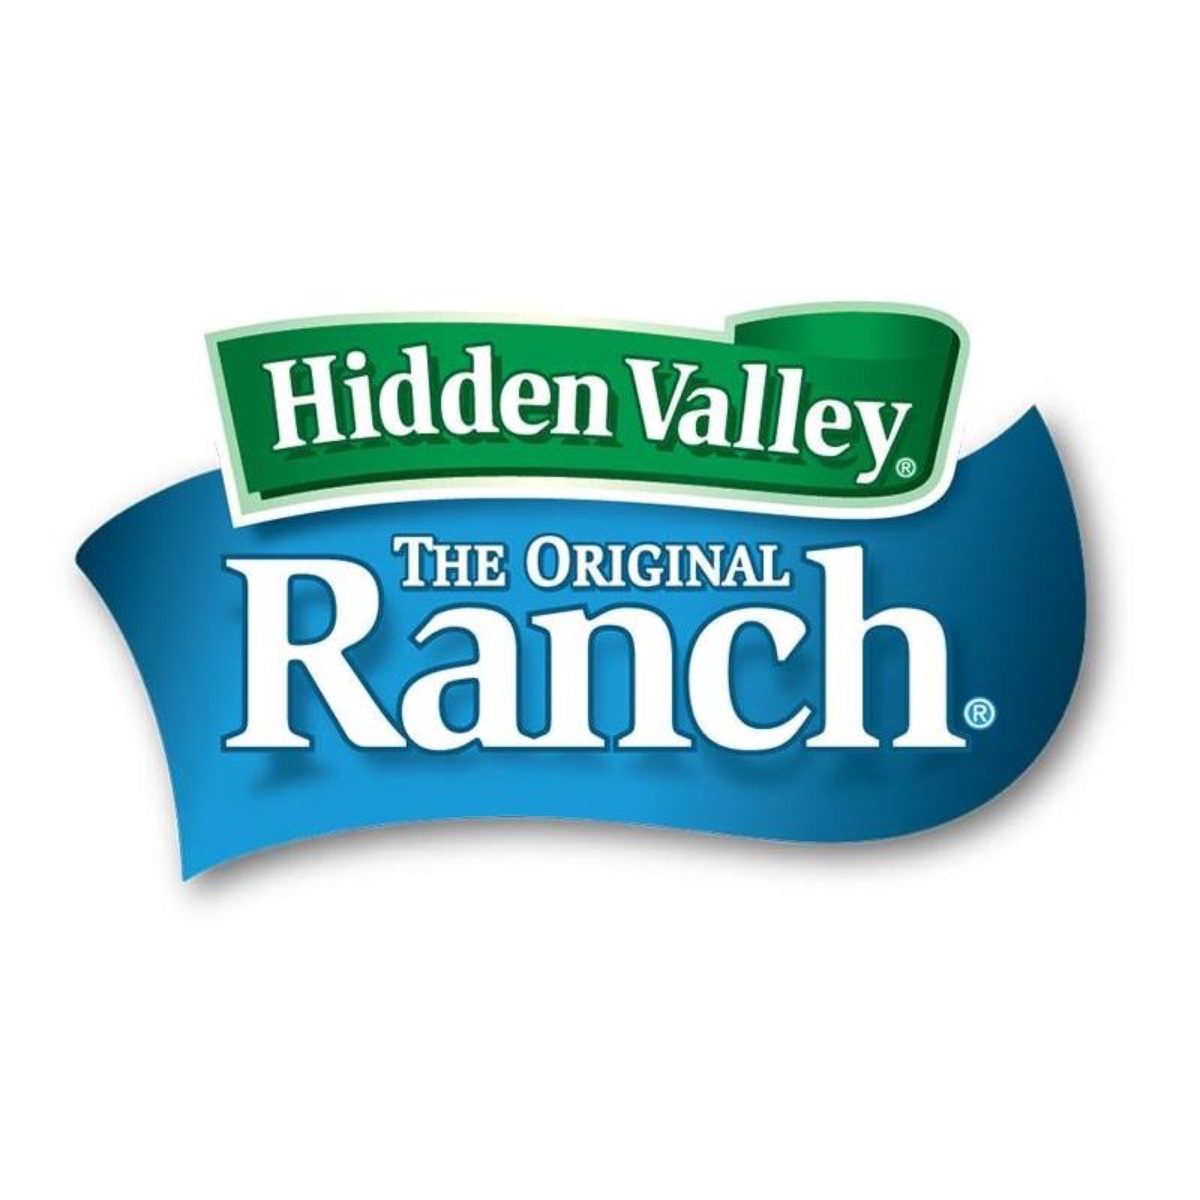 <p><strong><a class="SWhtmlLink" href="https://www.hiddenvalley.com" rel="noopener">Hidden Valley Ranch</a>, location unknown</strong></p> <p>None of the stories disclose the town in Alaska, but plumber Steve Henson was working in the Alaskan bush when he created Ranch. It was a tricky way to get his grouchy co-workers to eat their vegetables! Years later, he moved to California, bought a piece of property named Hidden Valley Ranch, and the rest is history.</p> <p><a class="SWhtmlLink" href="https://www.tasteofhome.com/article/best-homemade-ranch-dressing/" rel="noopener">Learn our secret to making the best homemade ranch dressing.</a></p>